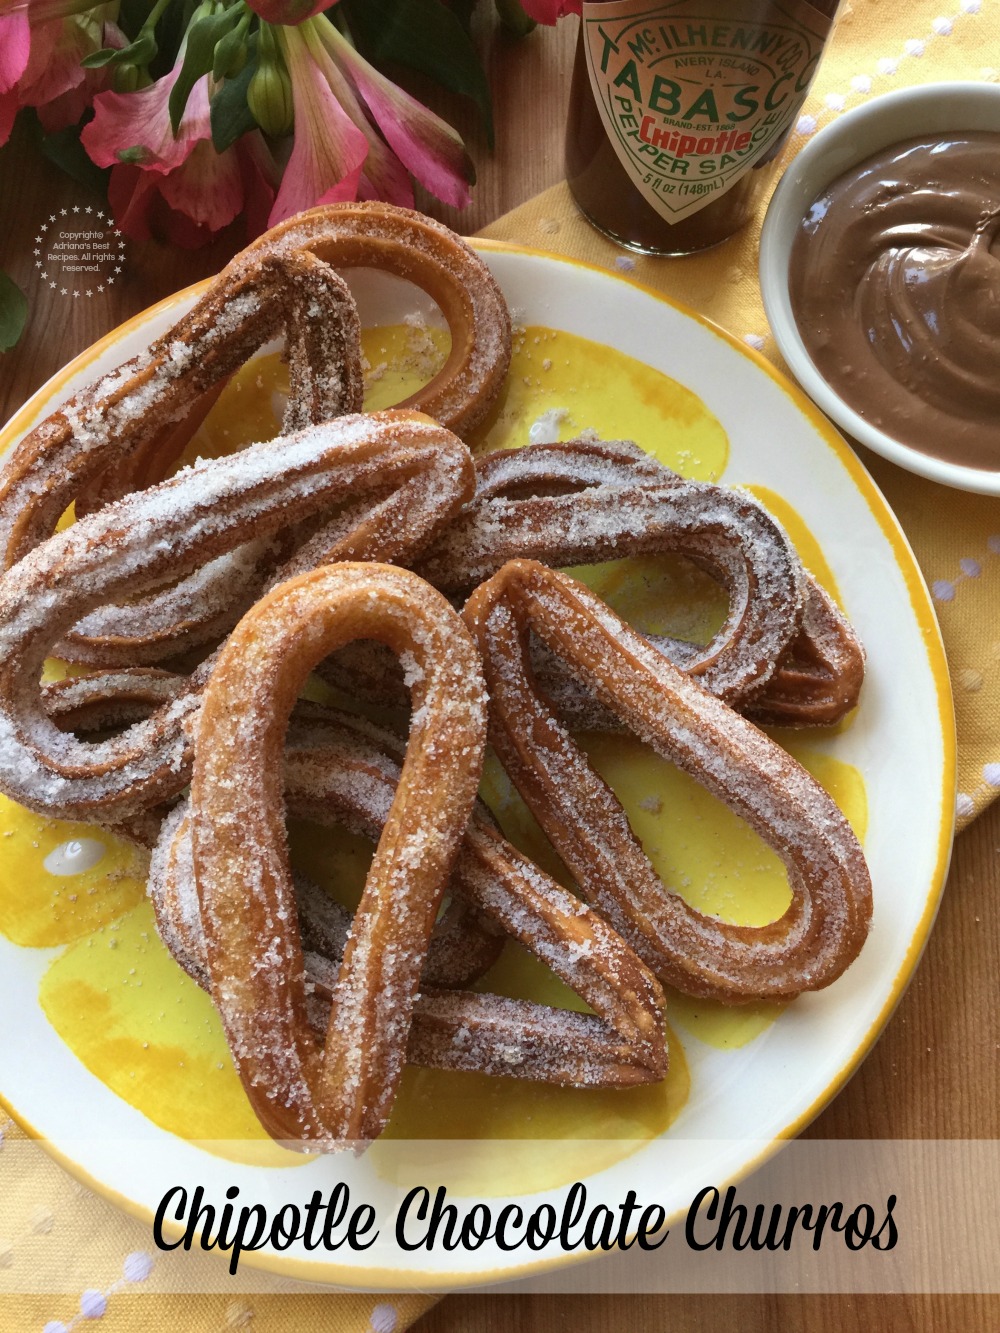 Chipotle Chocolate Churros inspired in the TABASCO Chipotle Sauce flavor profile